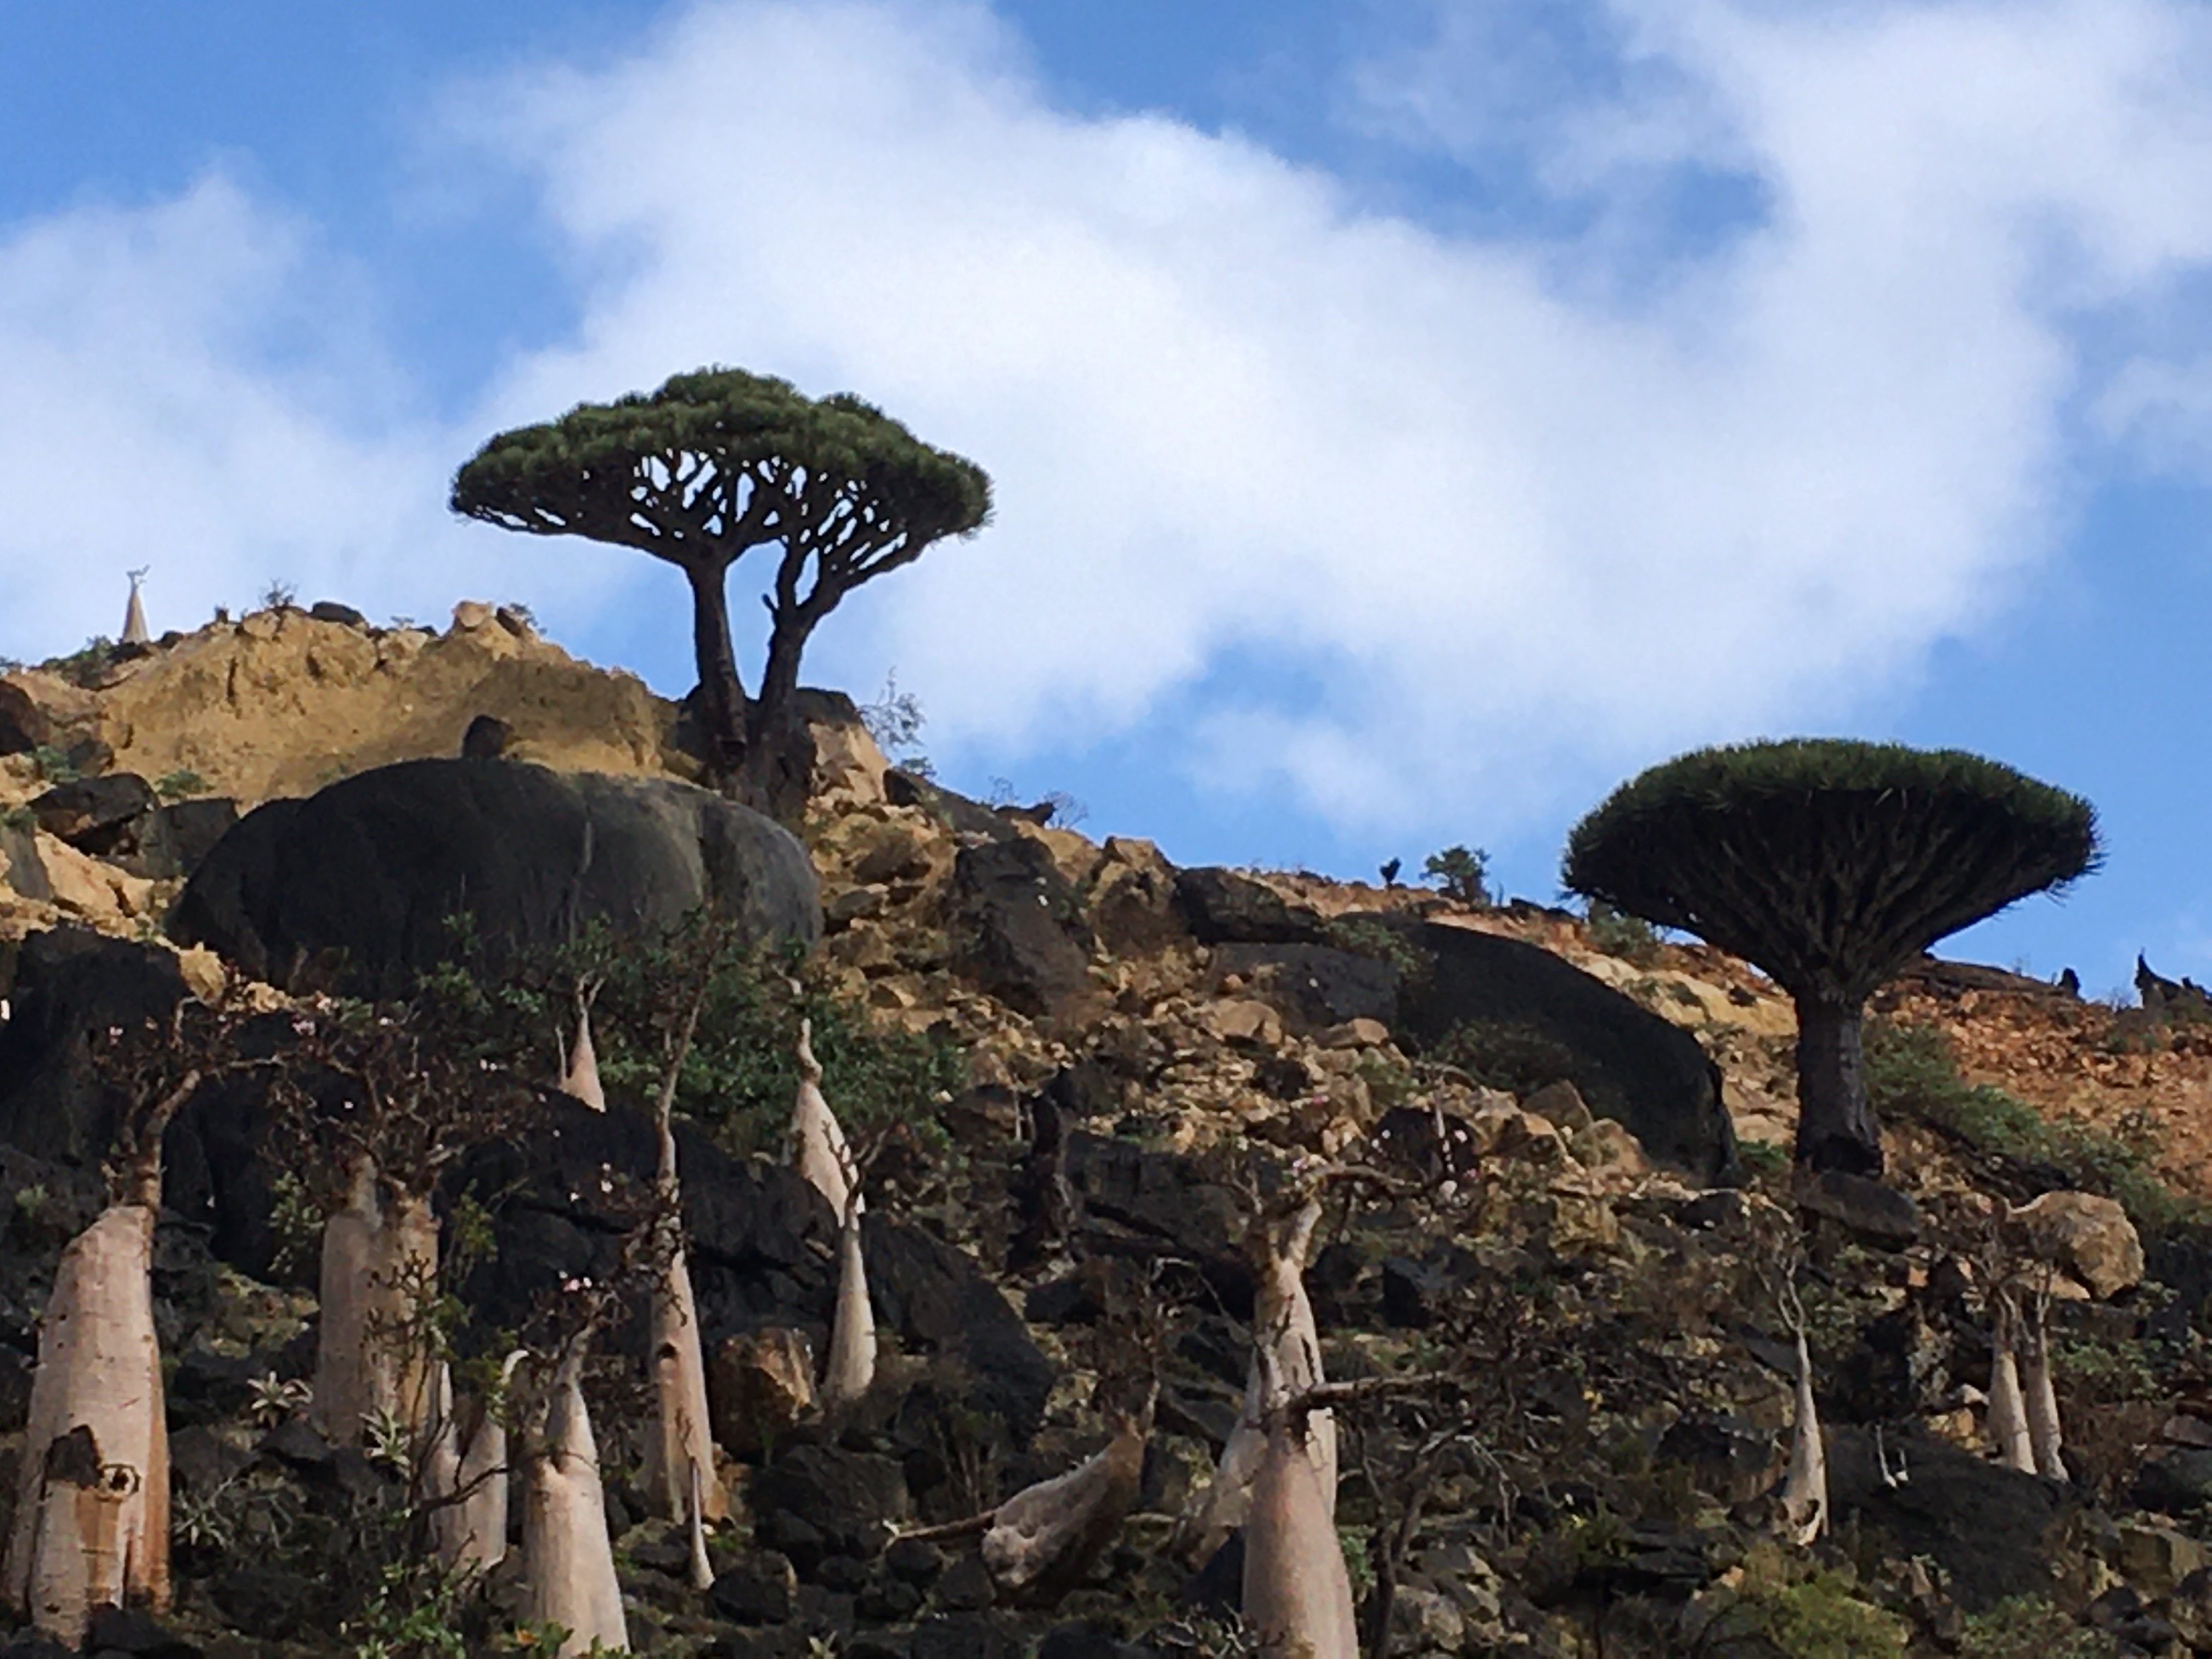 Folklore-Linguistic Expedition to Socotra Island